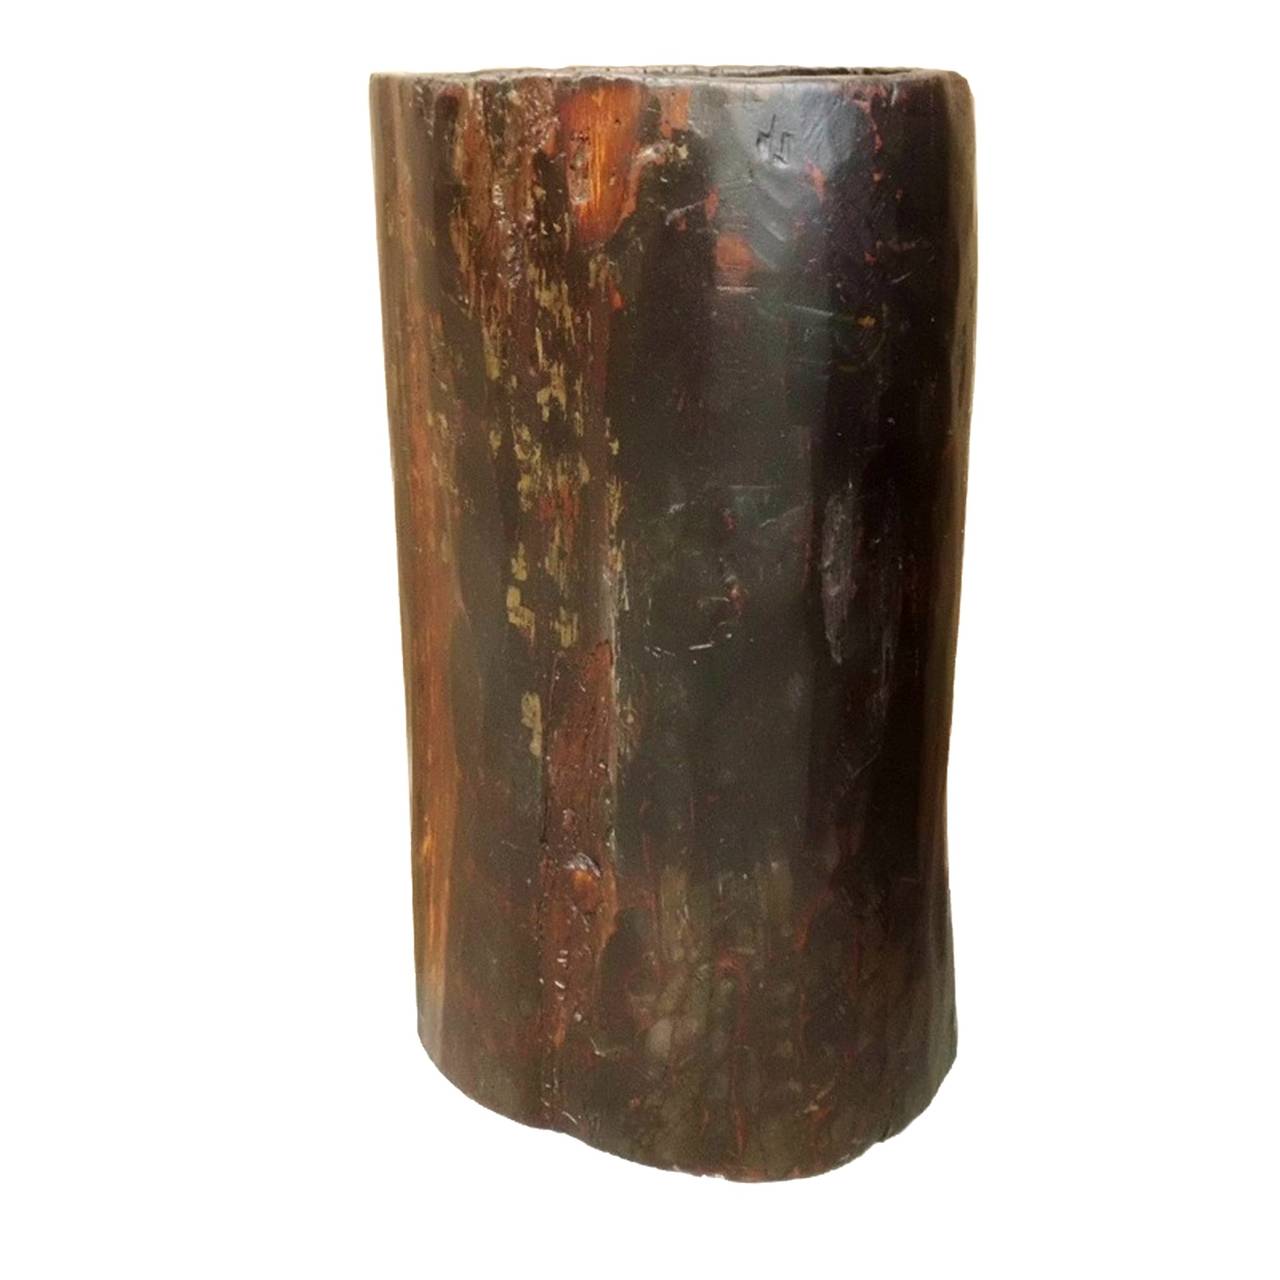 Polished Set of Three Giant Antique Whole Tree Stump Wooden Pots or Planters For Sale